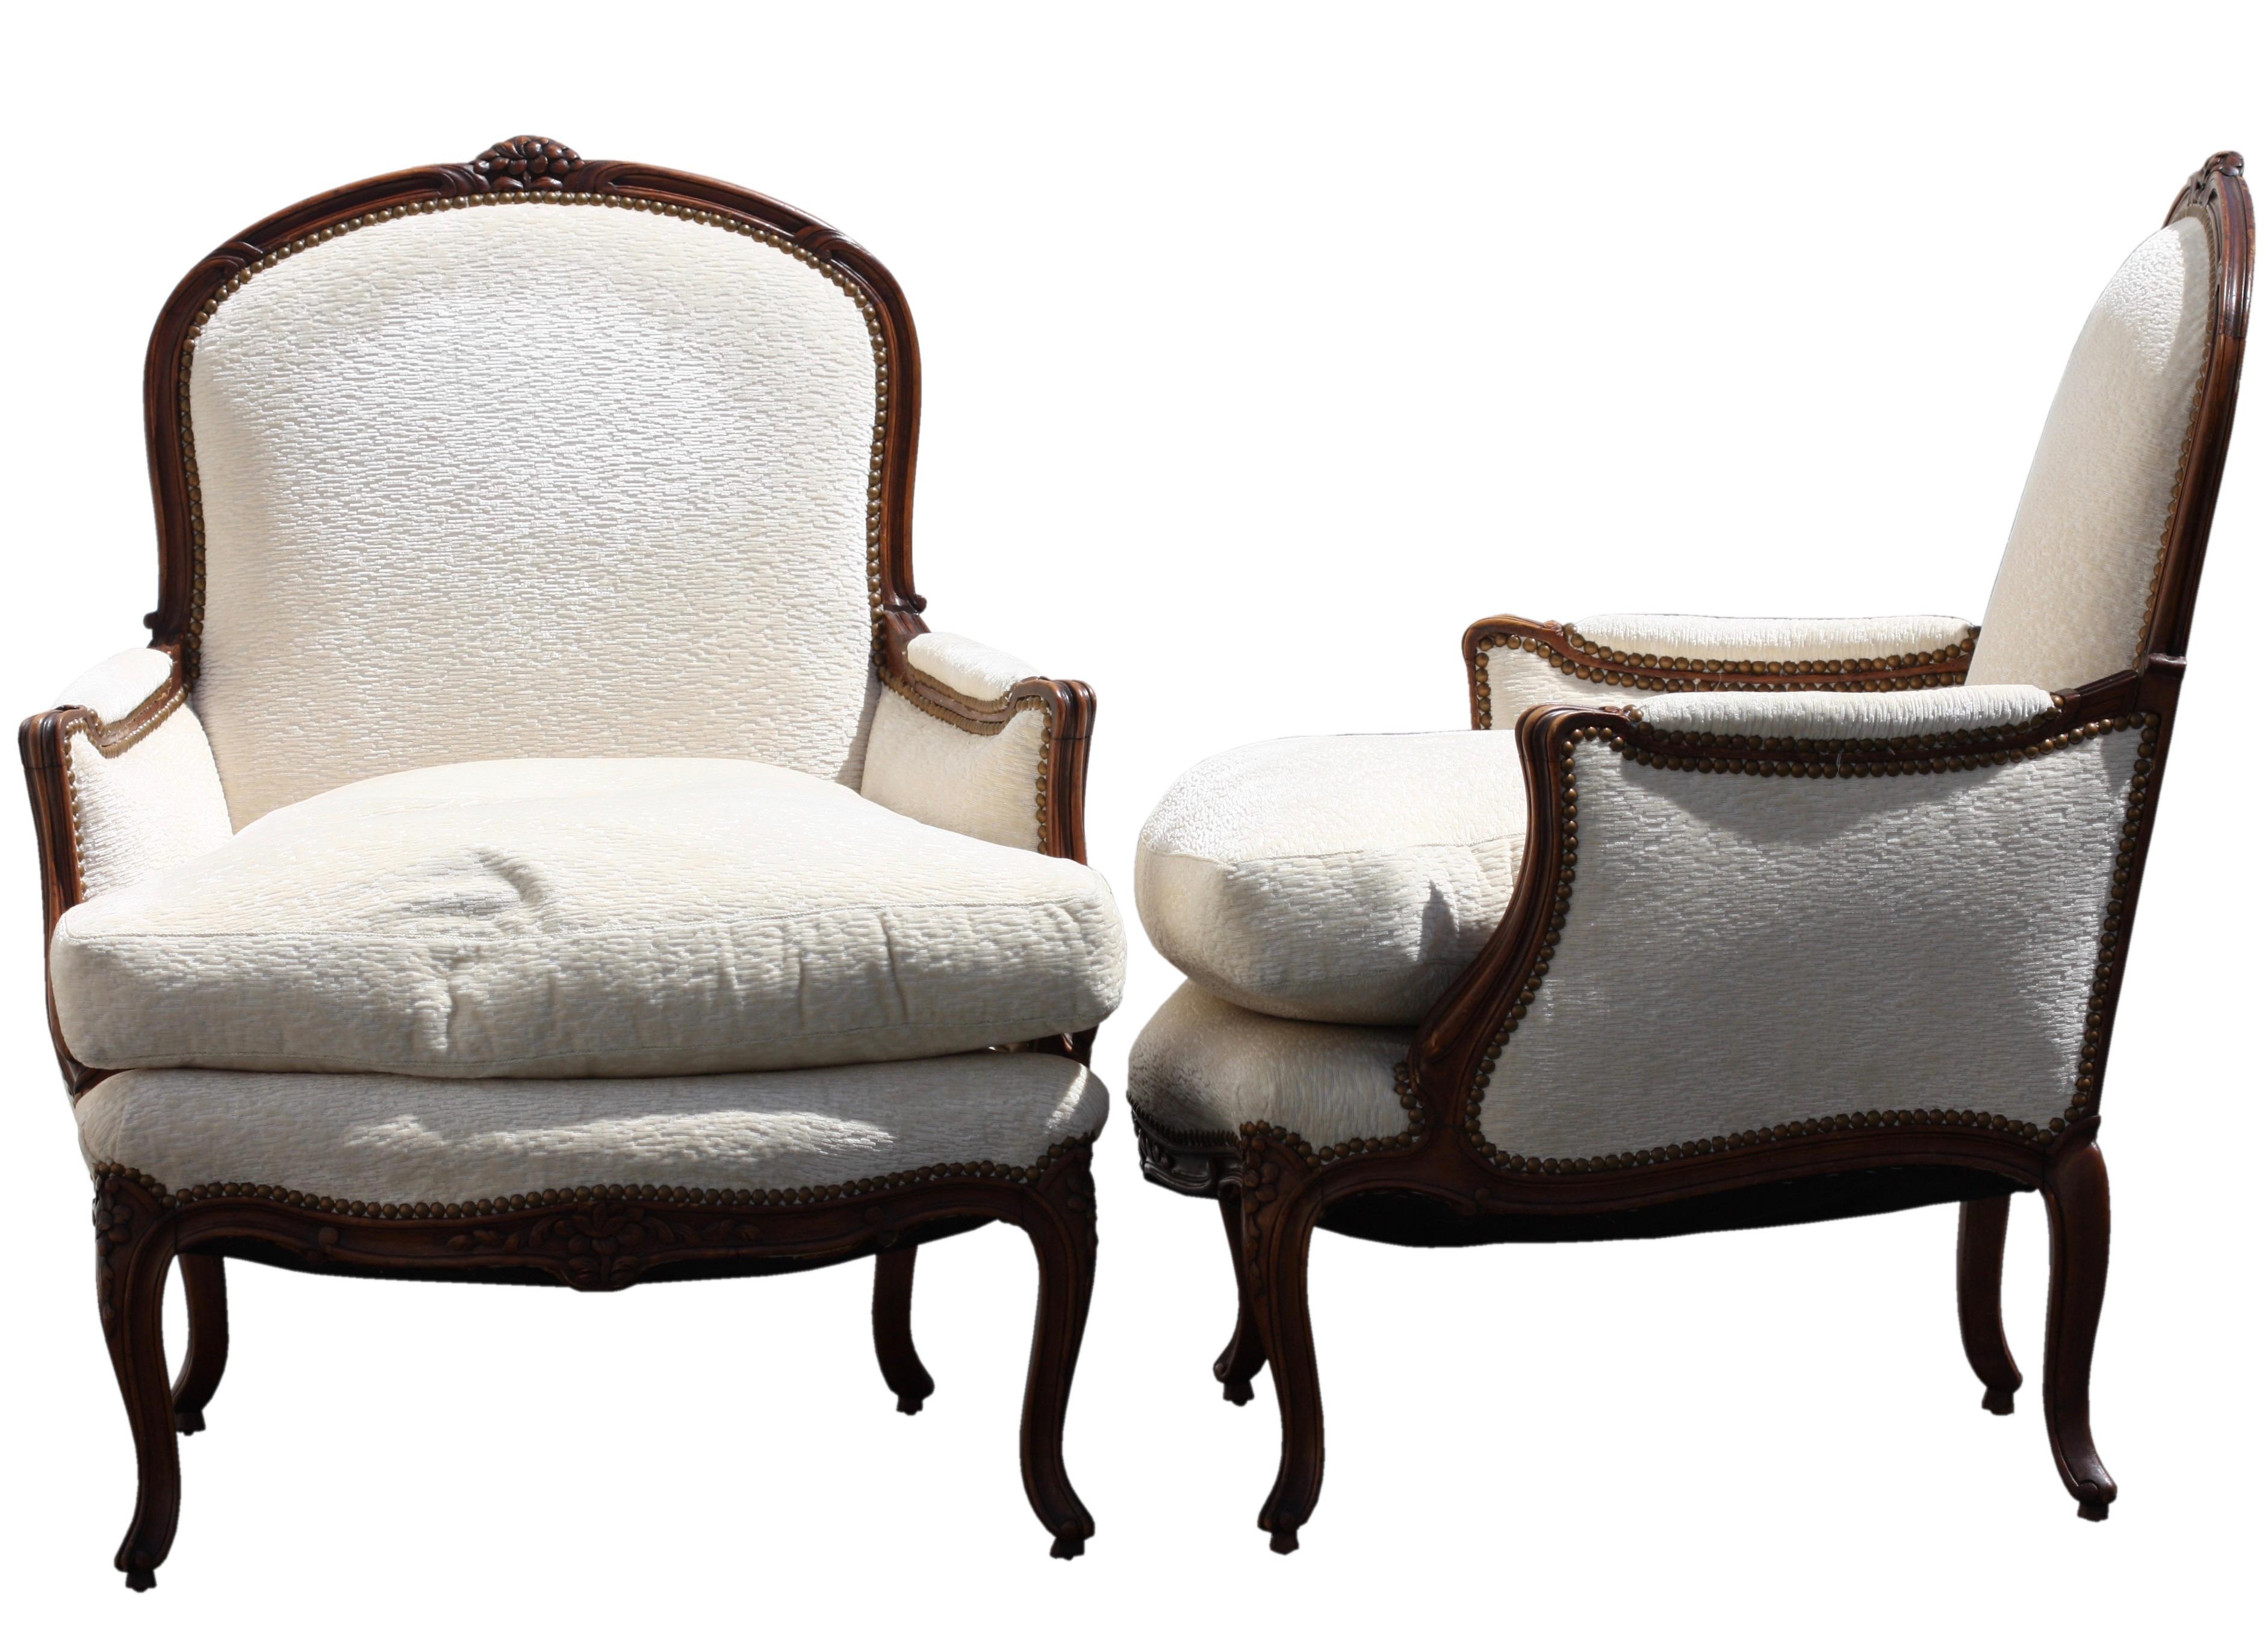 A pair of Louis XV style carved wood arm chairs 
mid-20th century,
Beechwood, fabric, 
Height 37.5 in. (95.25 cm.) 
Width 30 in. (76.2 cm.) 
Depth 30 in. (76.2 cm.).